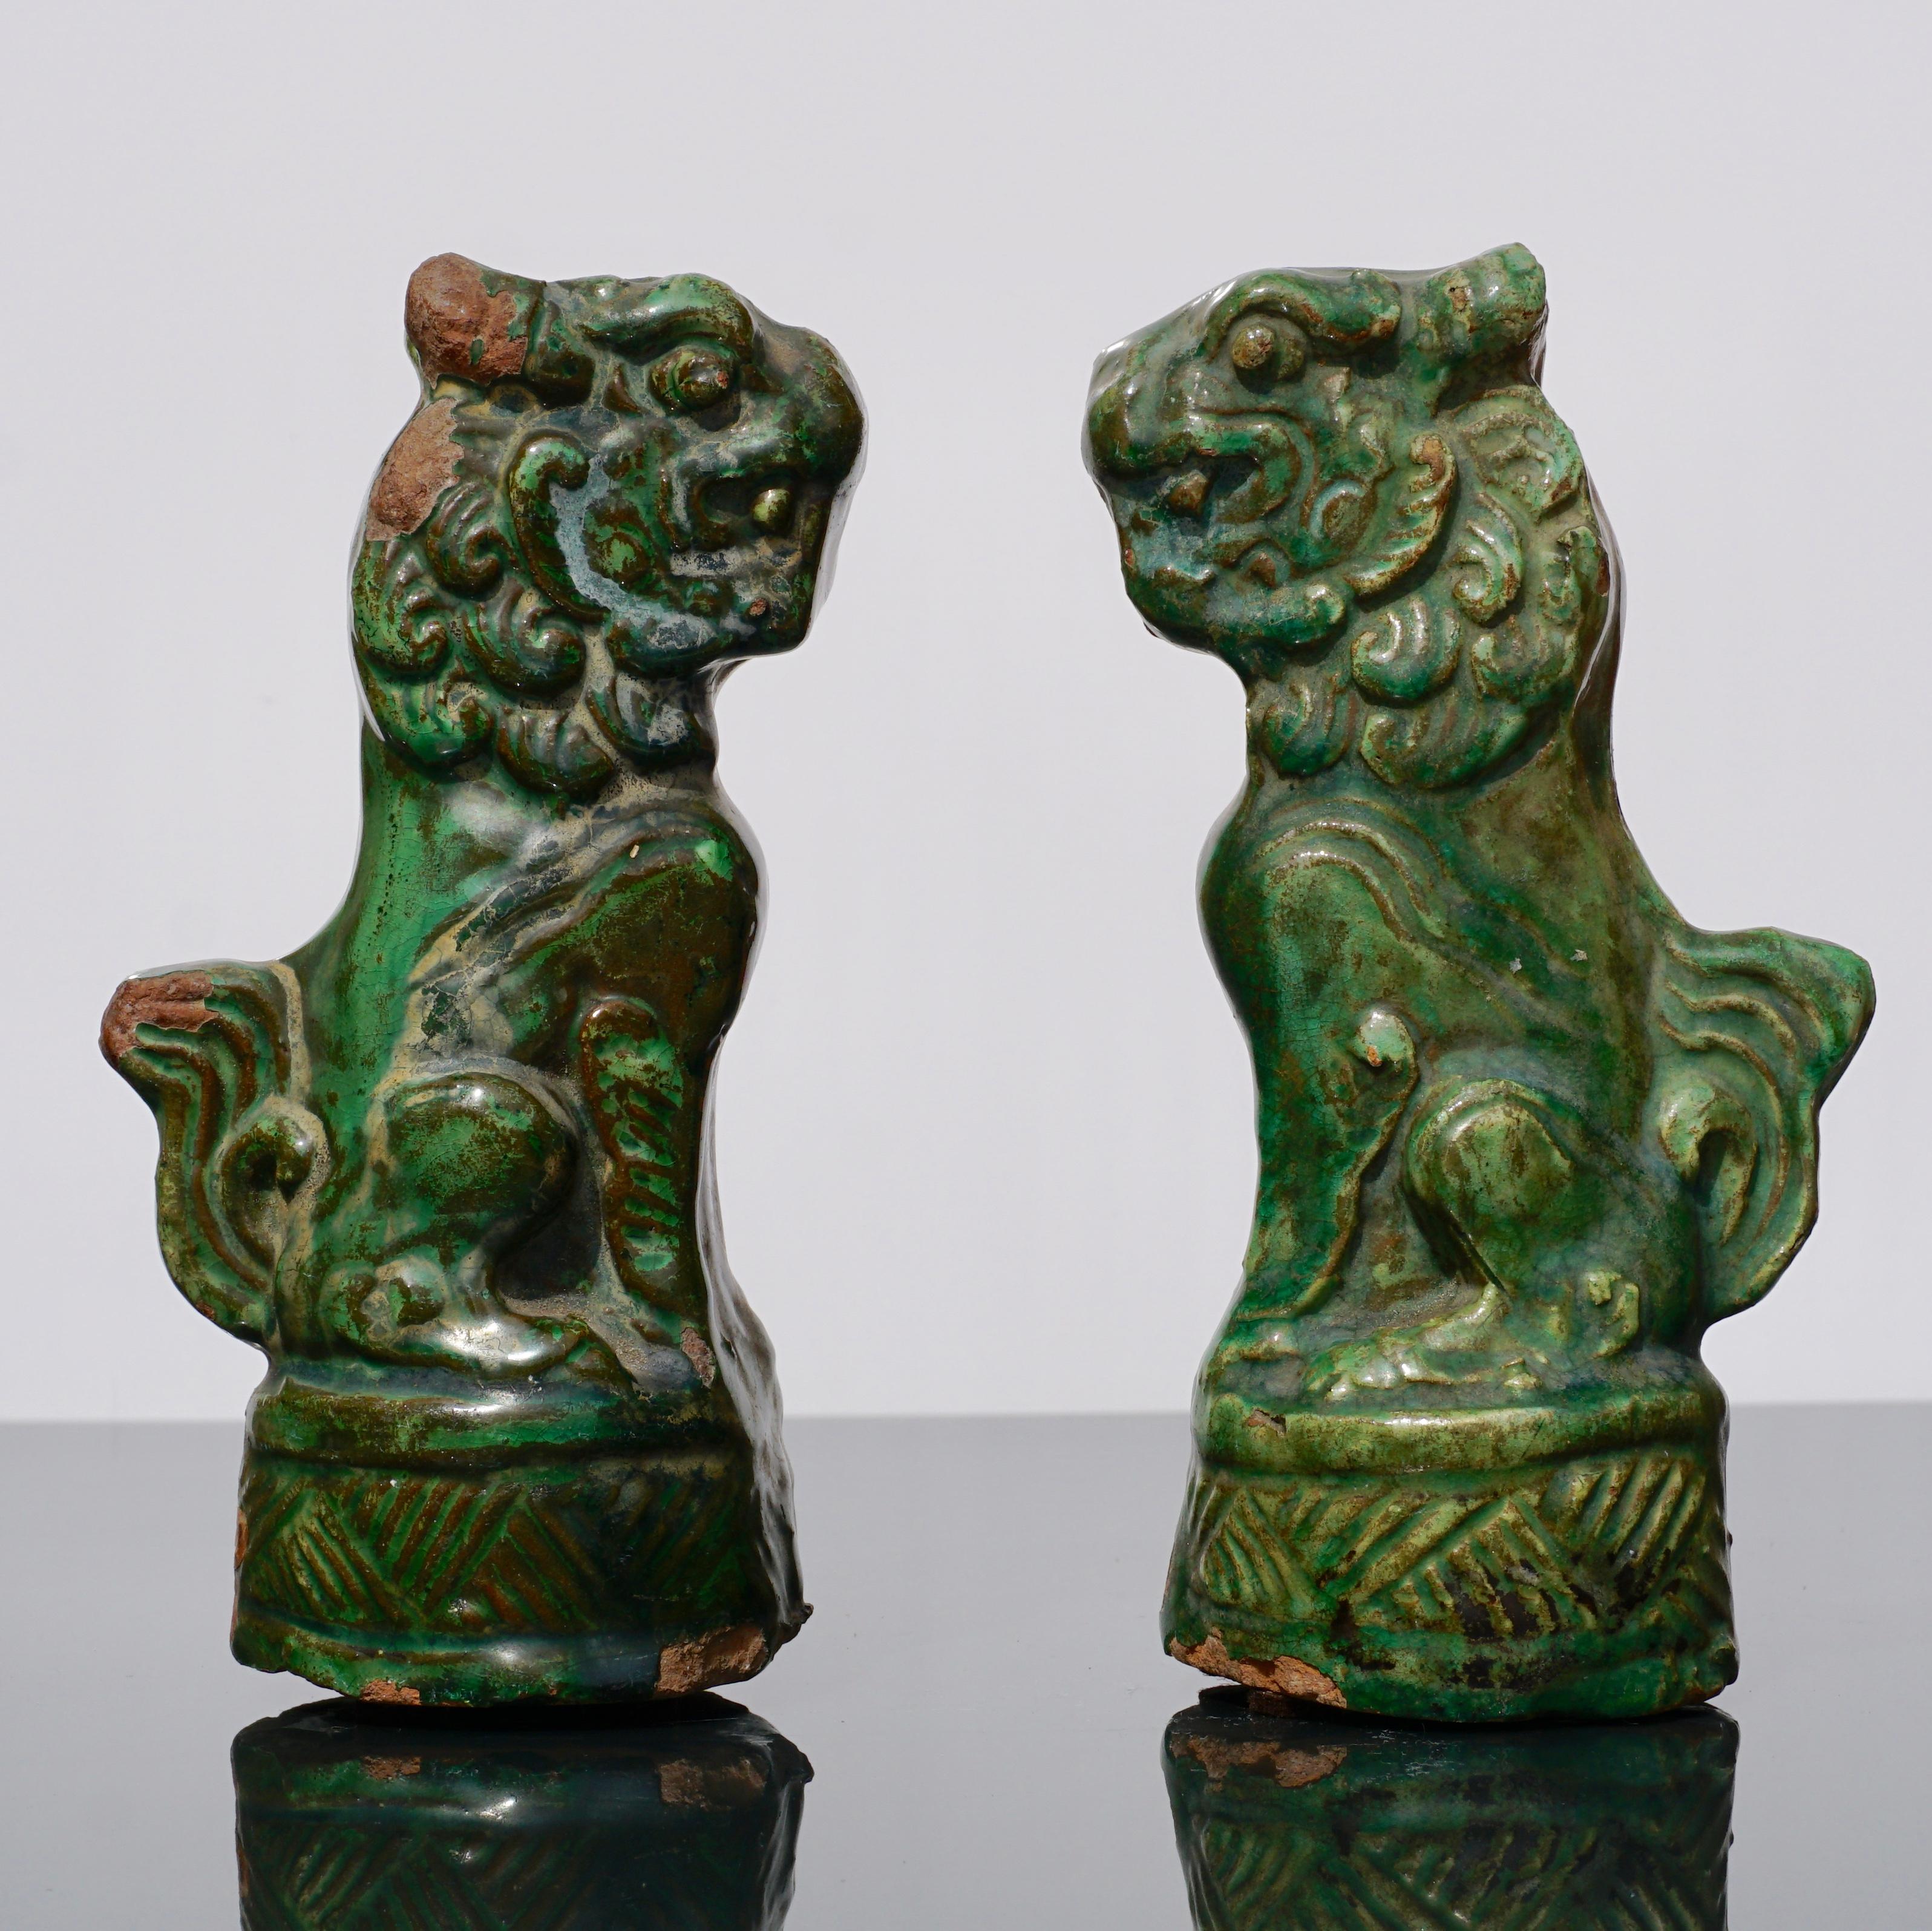 A wonderful pair of late Ming Early Qing Dynasty pottery green glazed Foo dogs or lions from circa 18th century China. A very rare pair as most examples are from roof tiles whereas these are statue figures. These might have been made for tomb